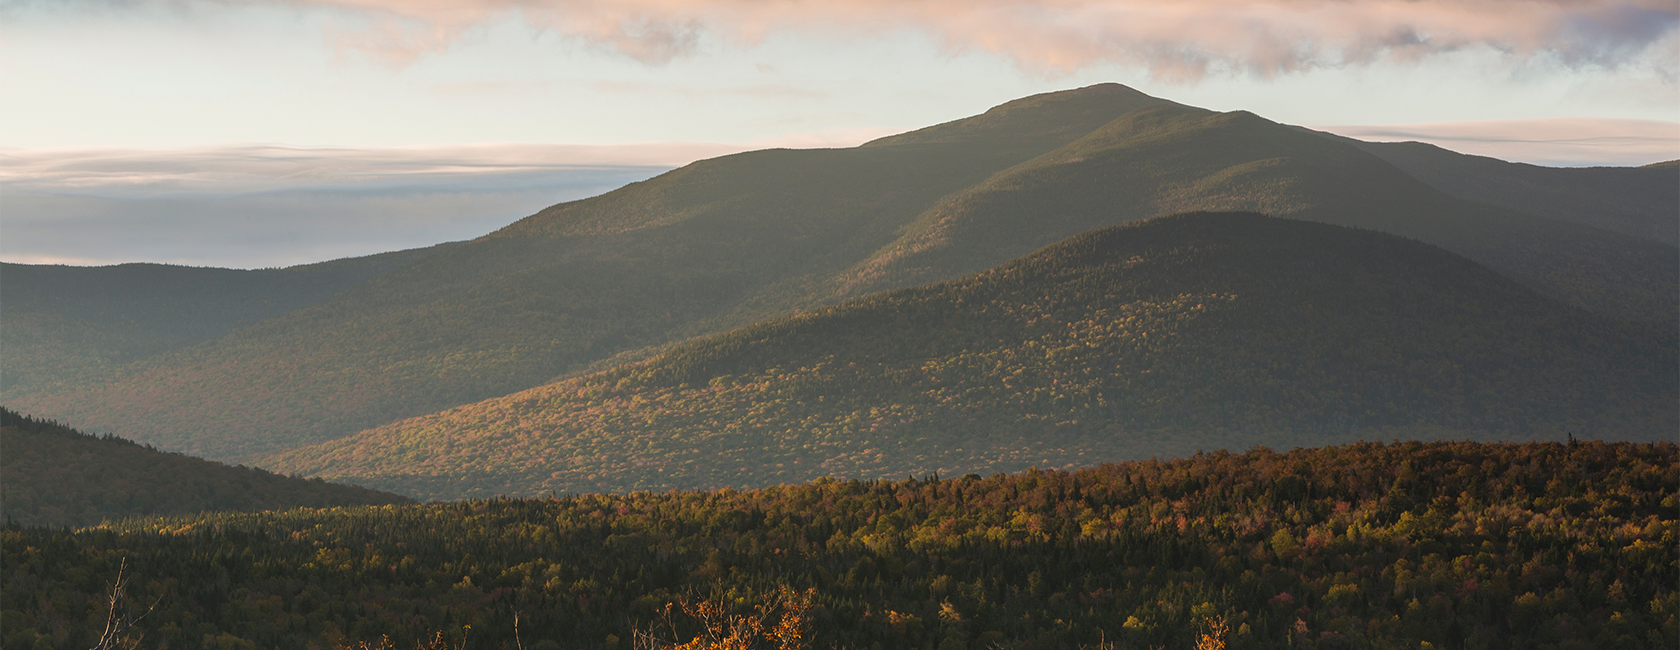 landscape picture of saddleback mountain in maine